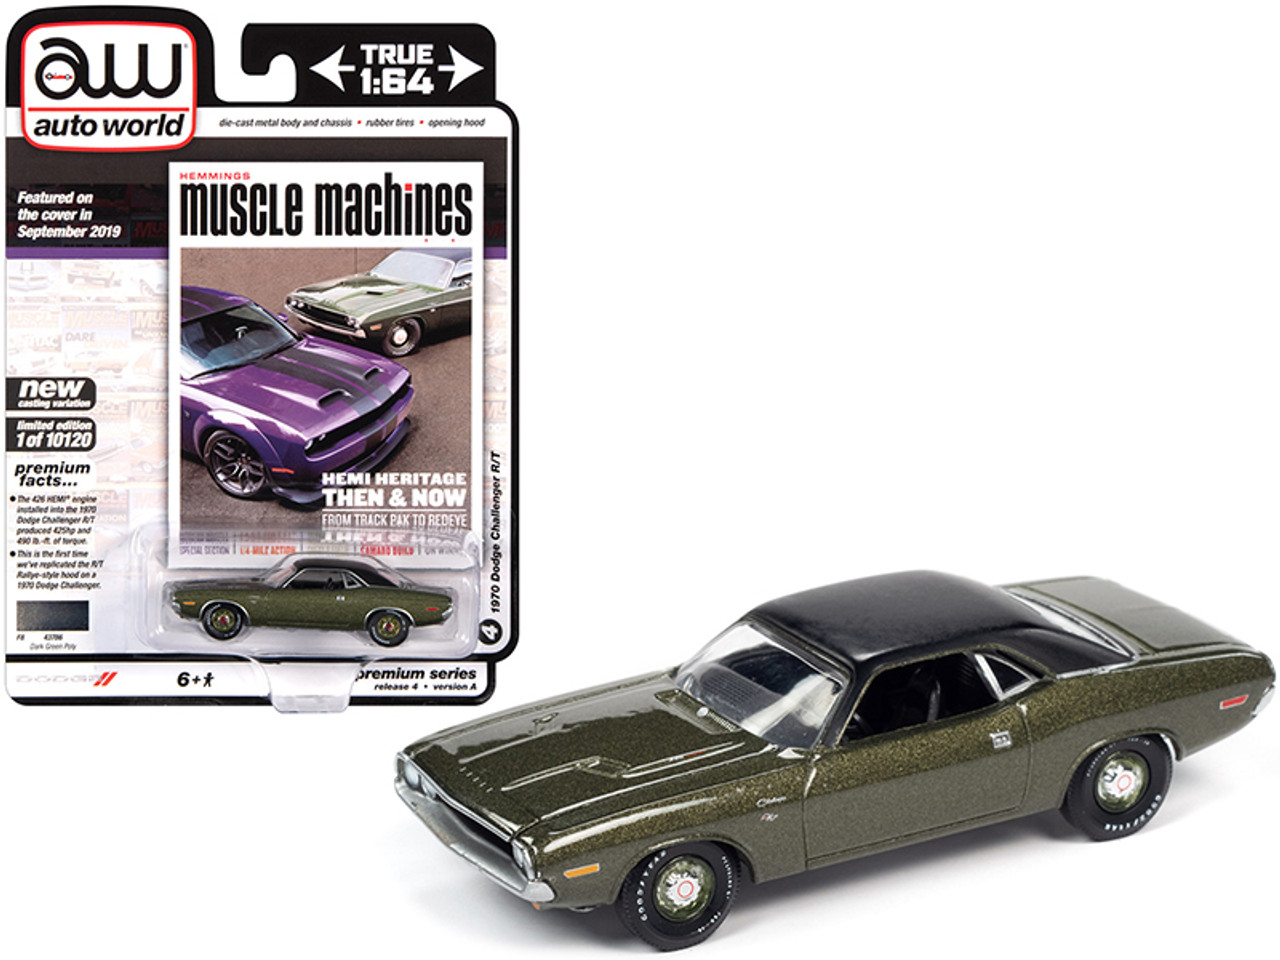 1970 Dodge Challenger R/T Dark Green Metallic with Flat Black Vinyl Top "Hemmings Muscle Machines" Magazine Cover Car (September 2019) Limited Edition to 10120 pieces Worldwide 1/64 Diecast Model Car by Autoworld